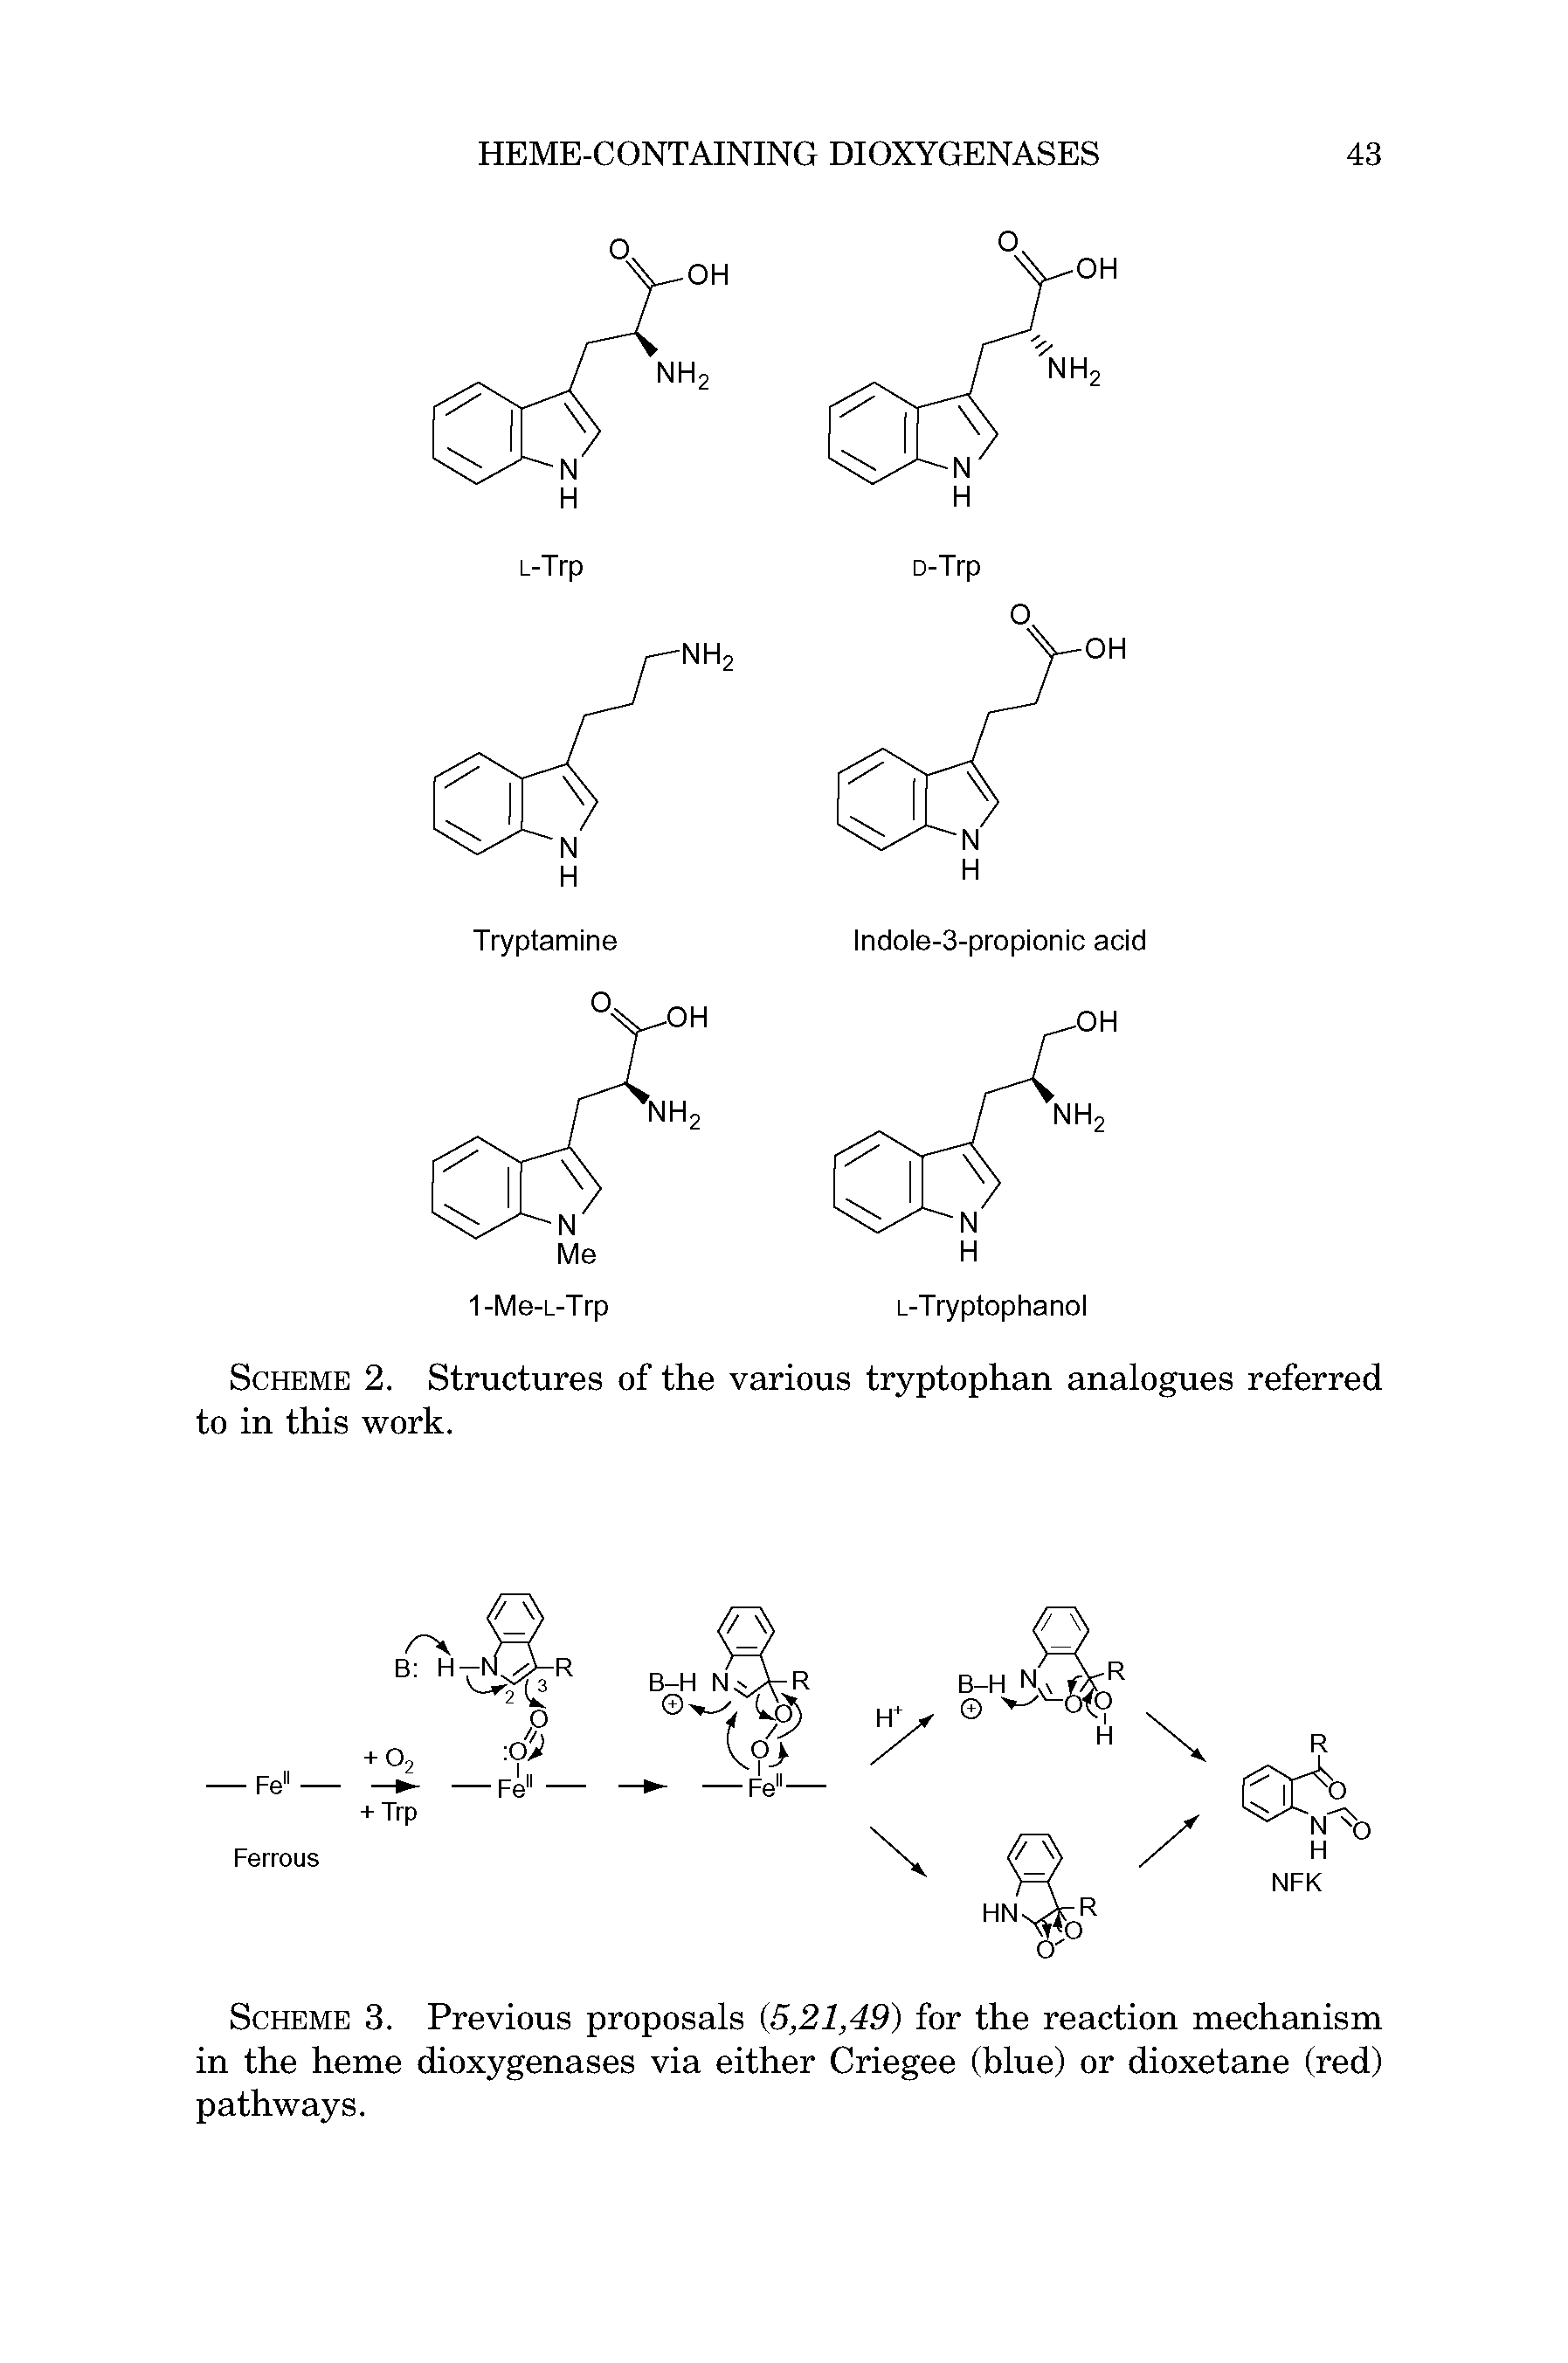 Scheme 2. Structures of the various tryptophan analogues referred to in this work.